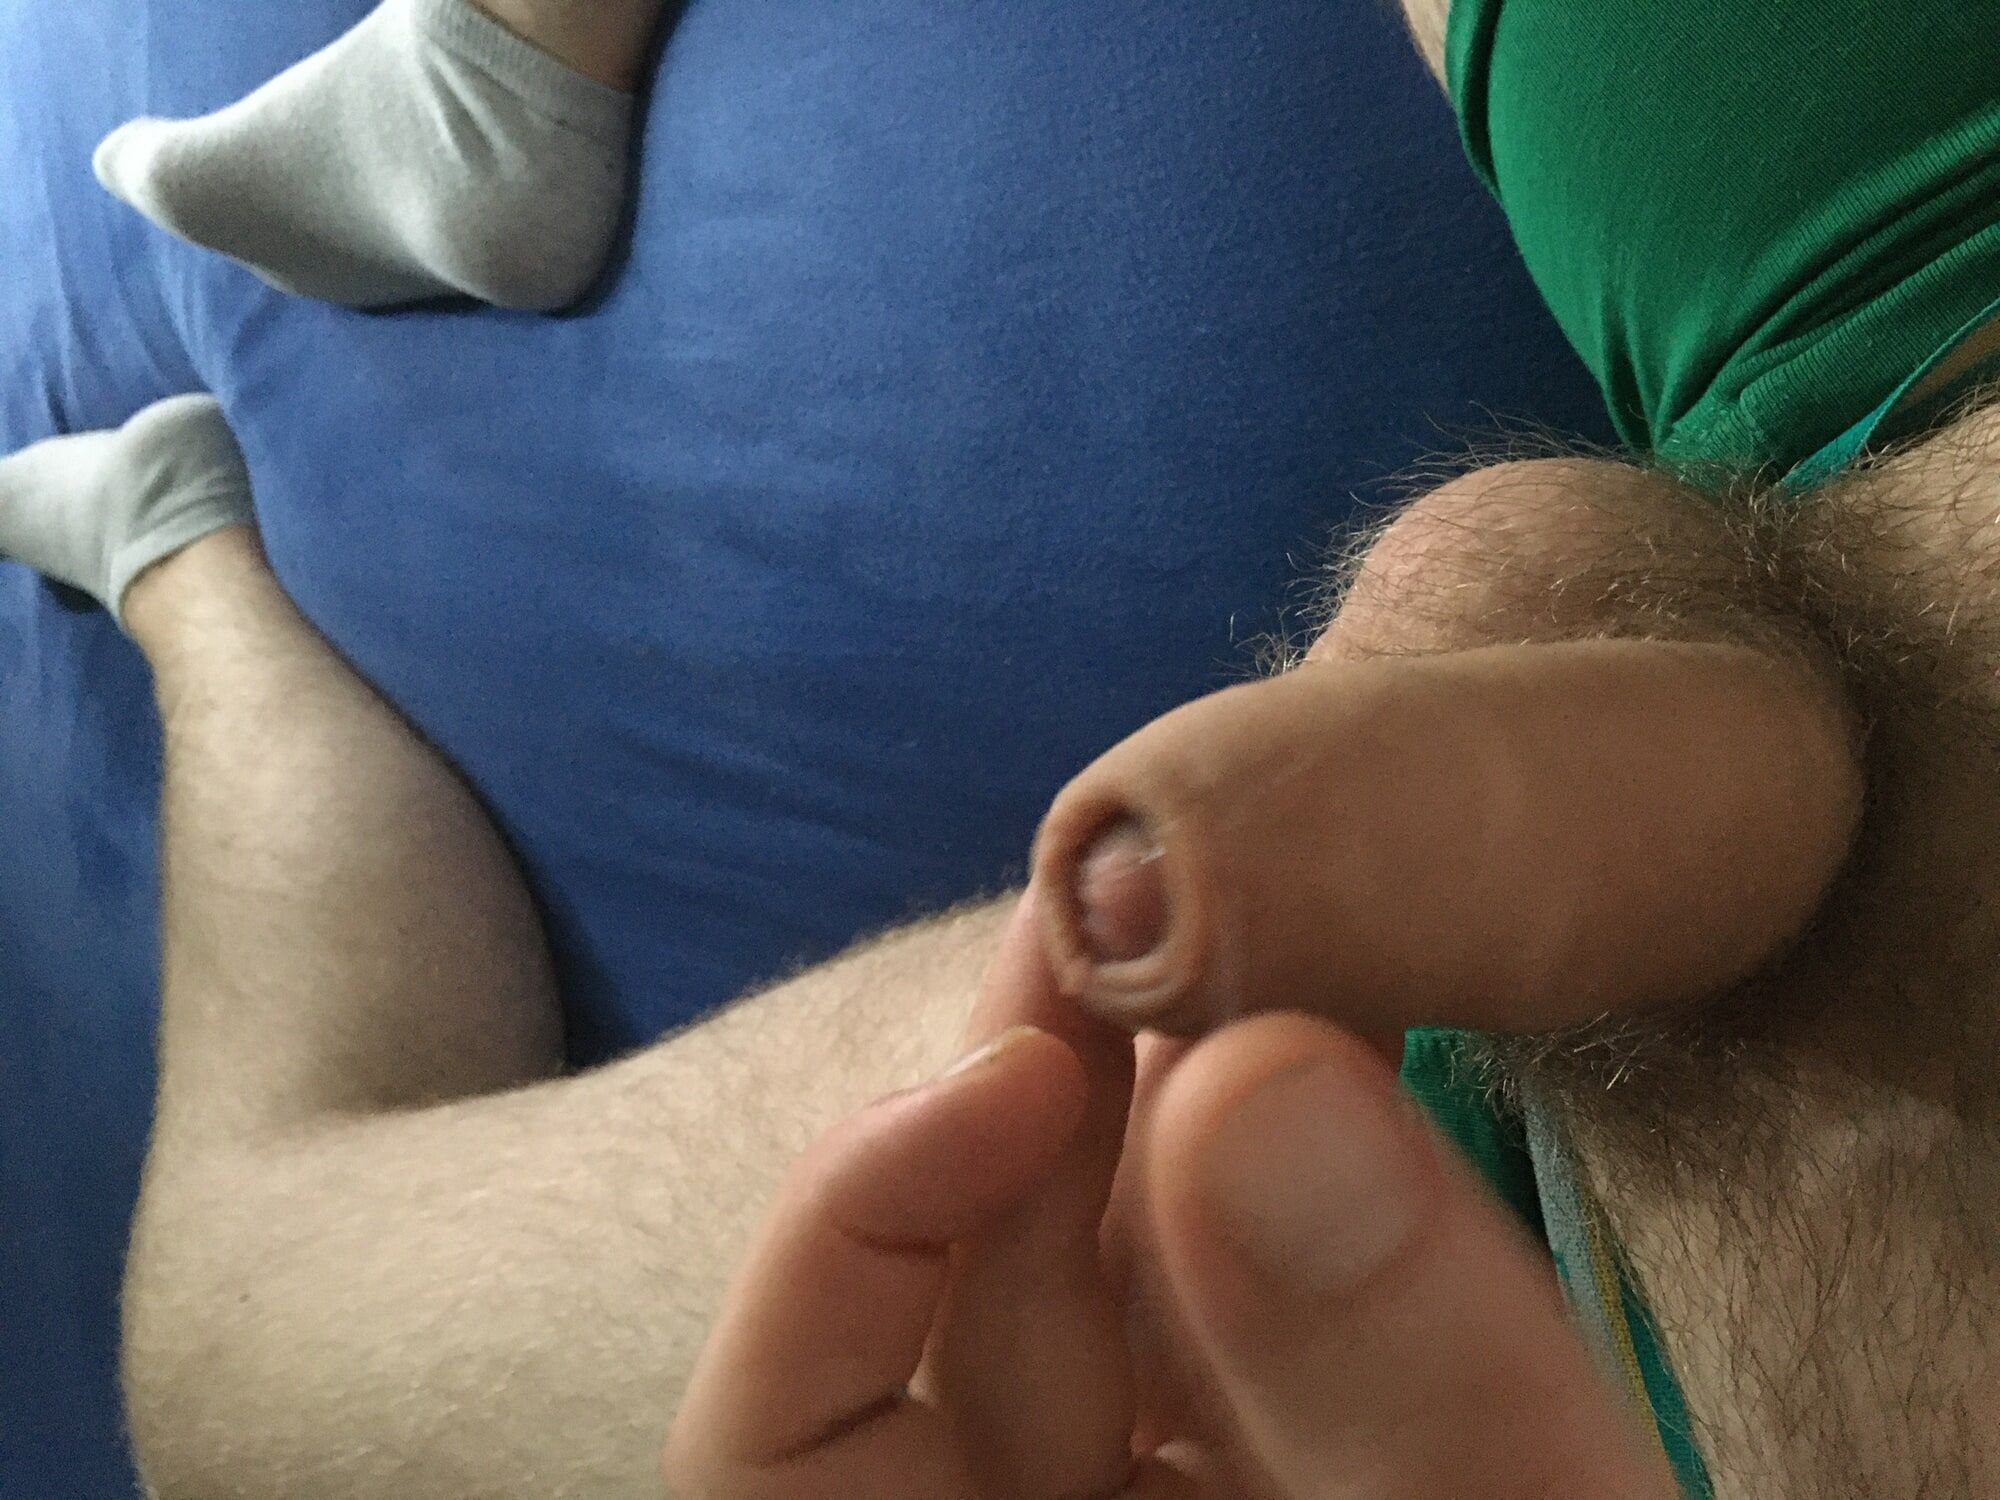 Hairy Dick And Balls Cockhead Foreskin Play With Pre- Cum #11